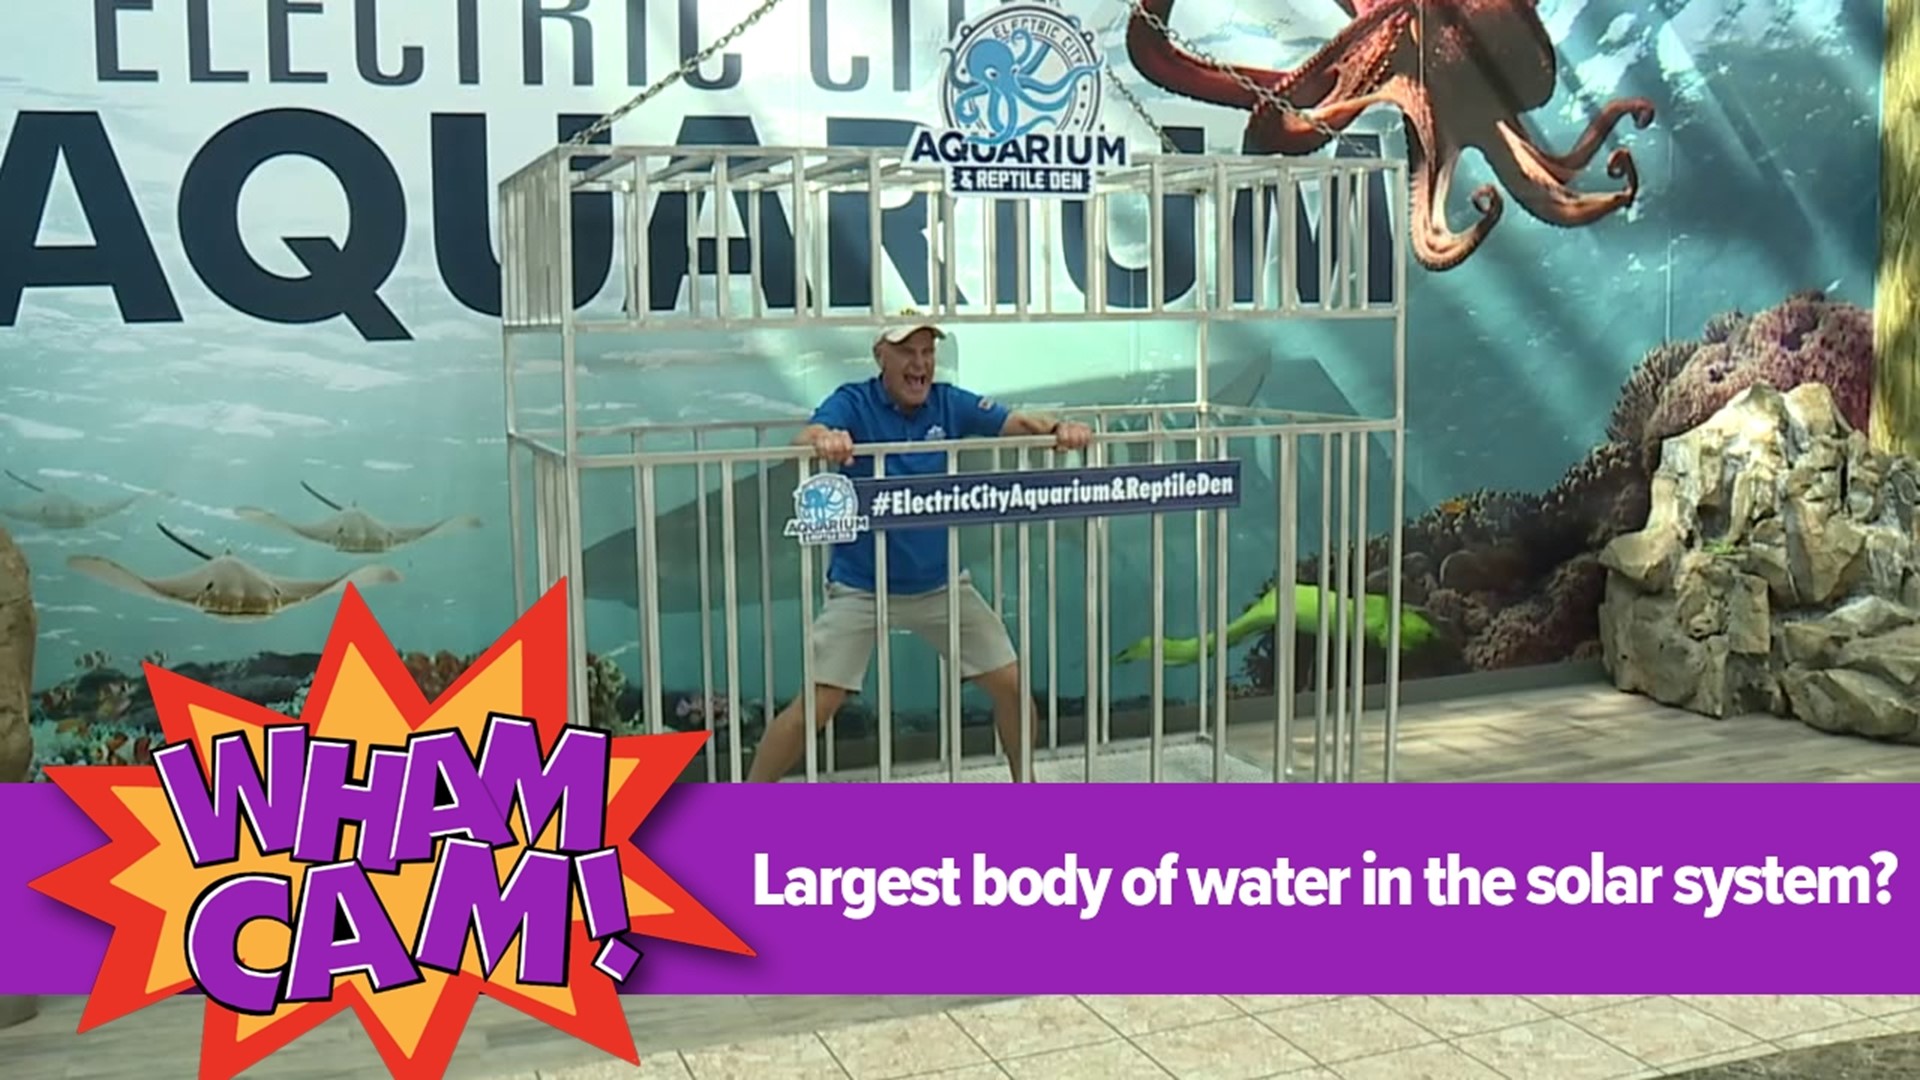 Where in the solar system is there more water than Earth, or is it a trick question? As always, Joe Snedeker has the answer in this week's Wham Cam.